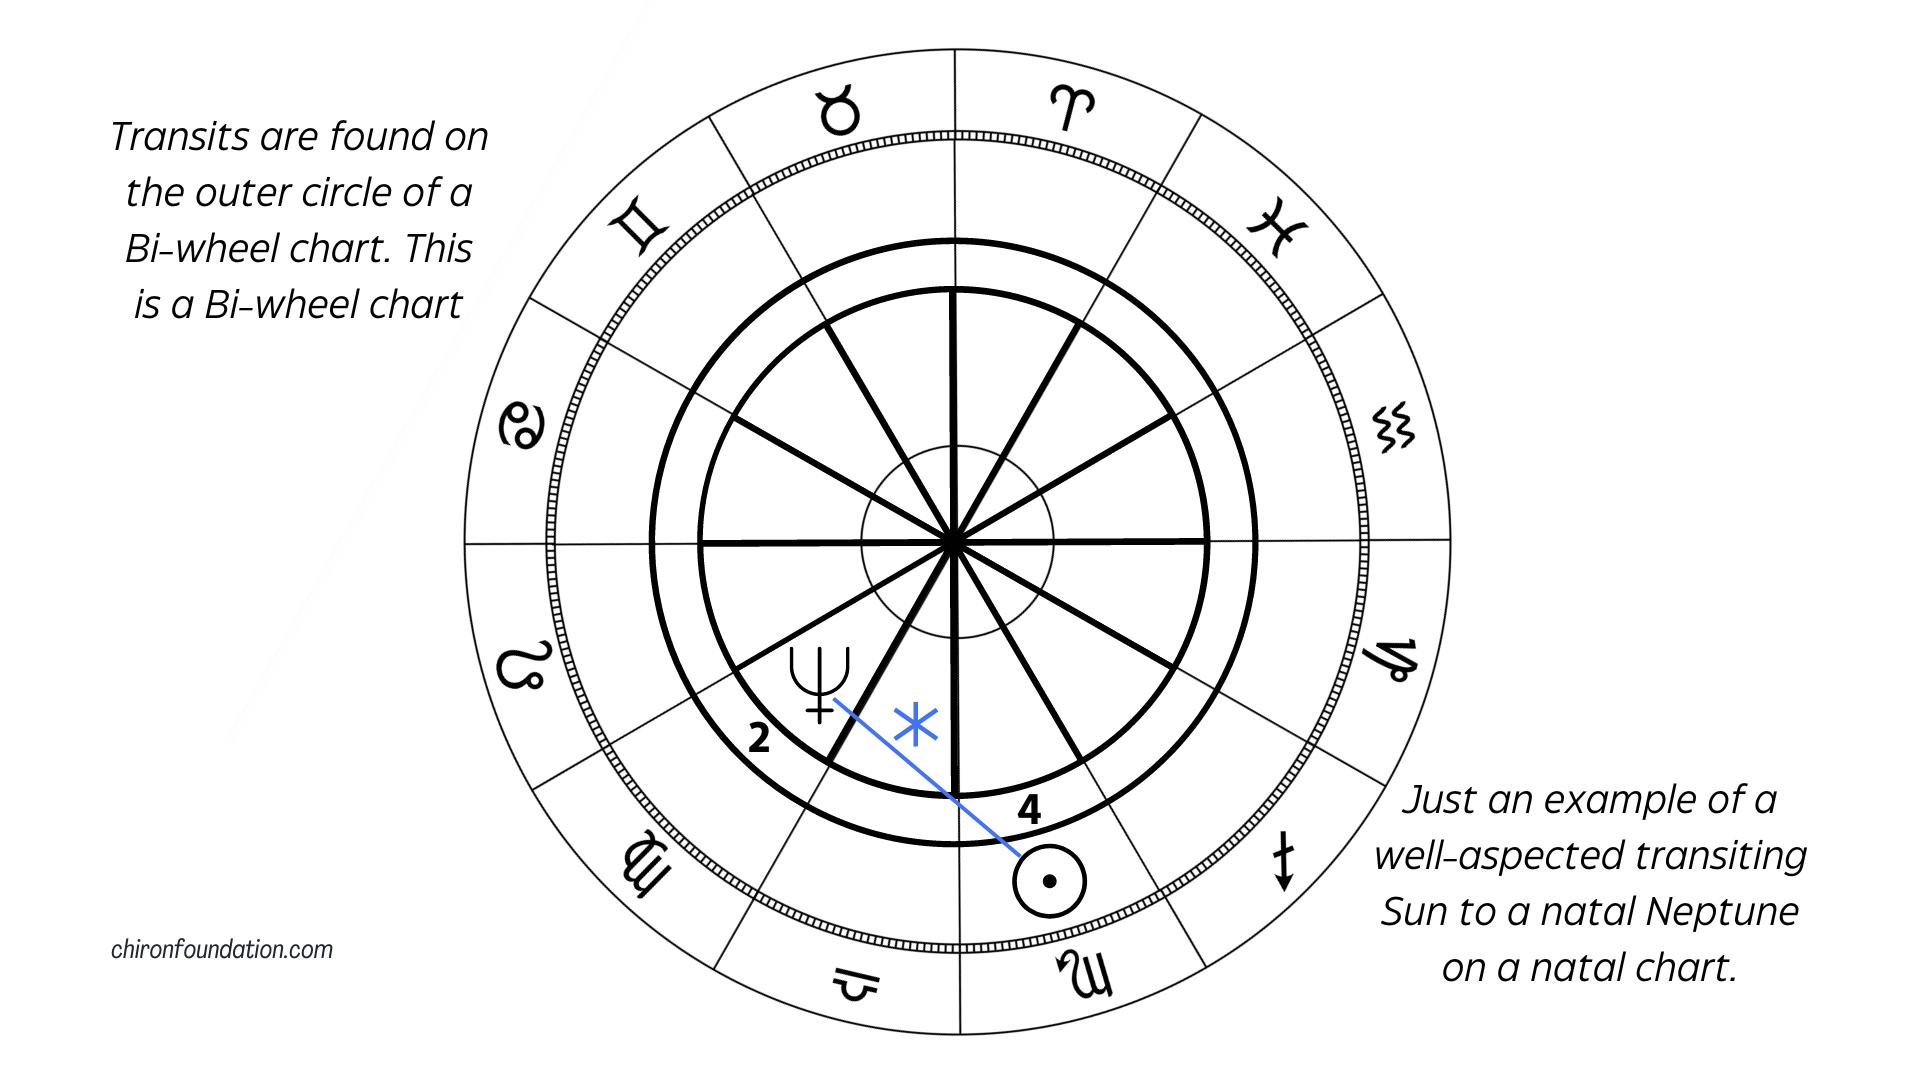 An example of a well-aspected transiting Sun to a natal Neptune on a birth chart